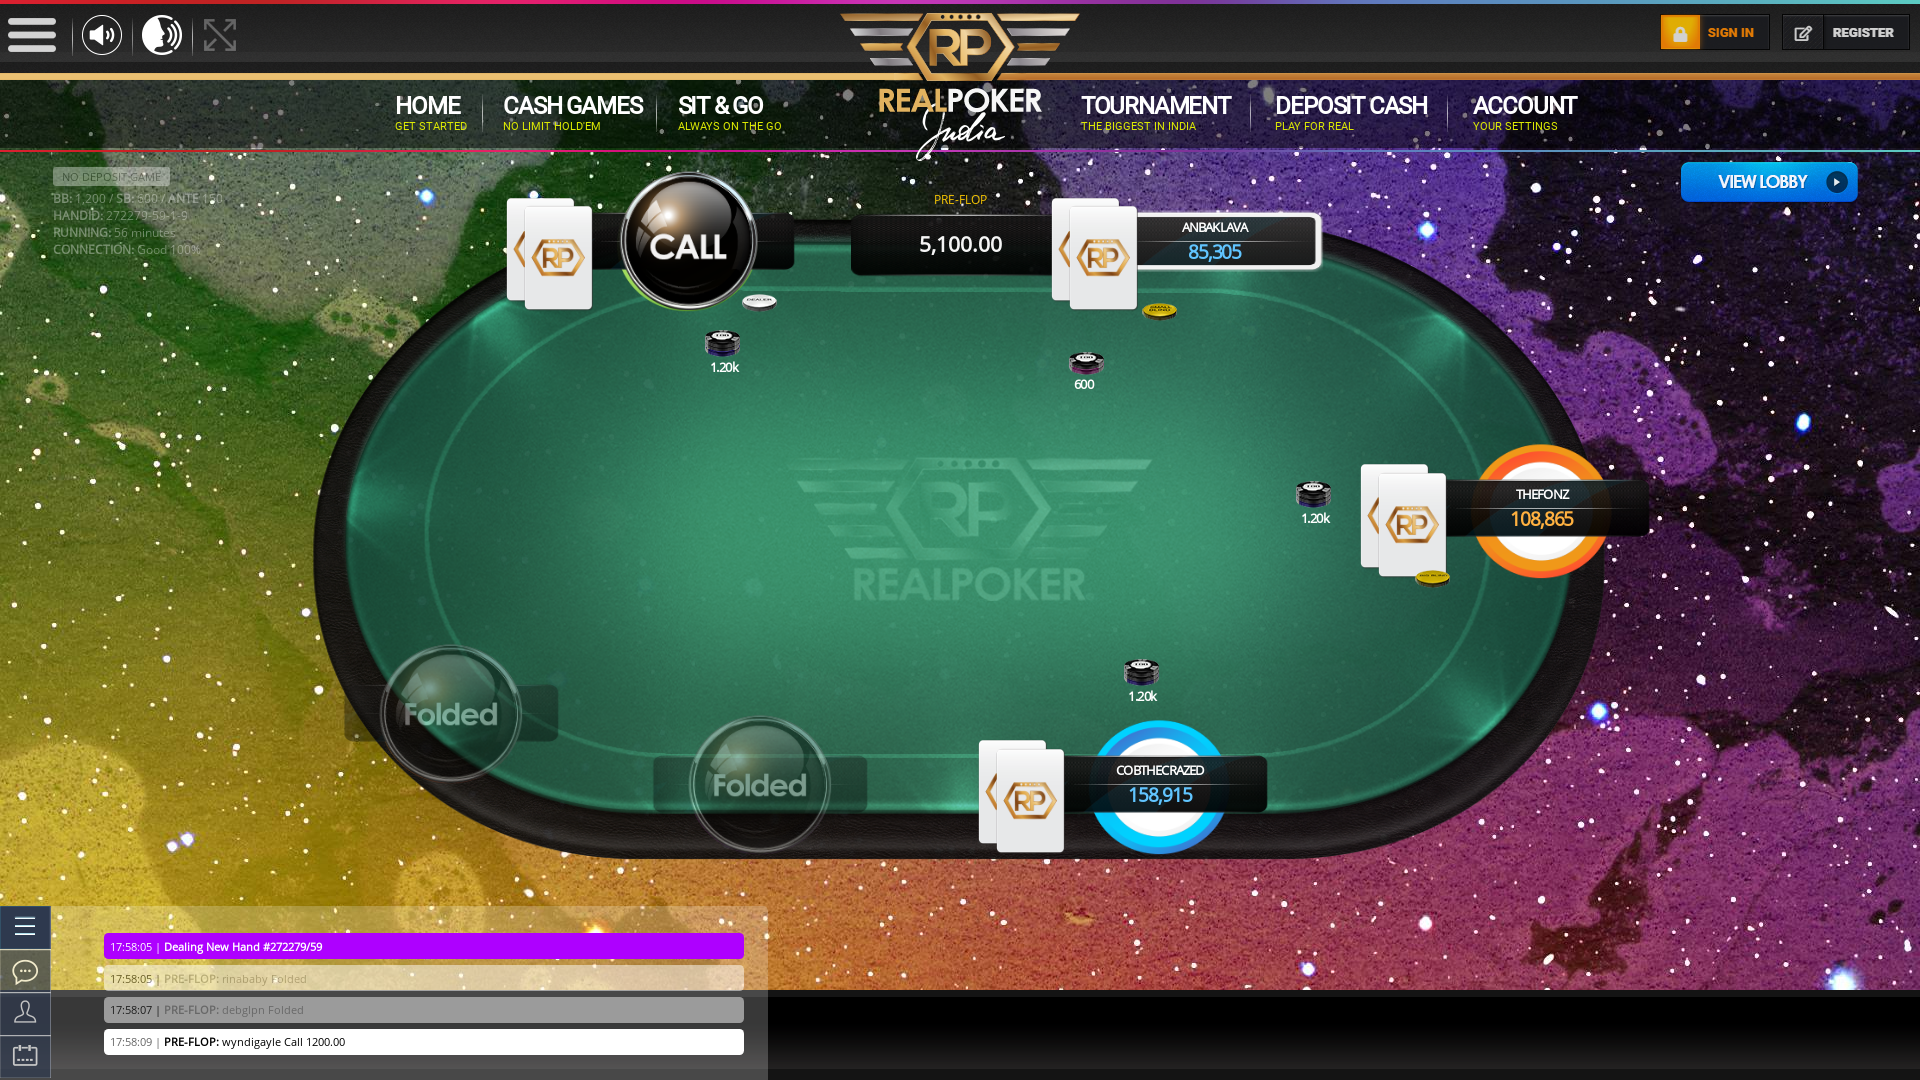 Indian online poker on a 10 player table in the 55th minute match up